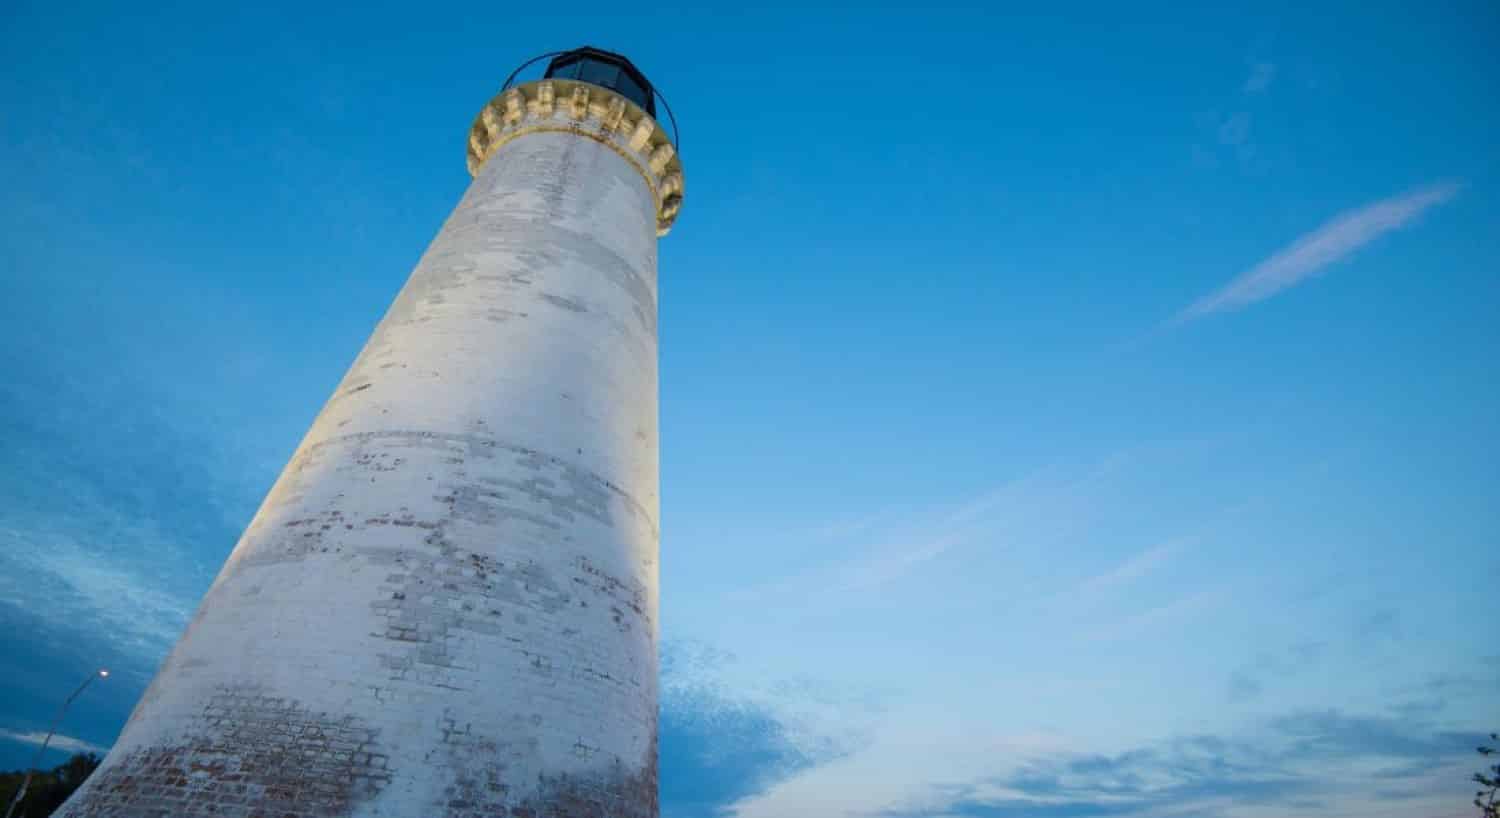 View of the white lighthouse from the base looking straight up amidst blue skies